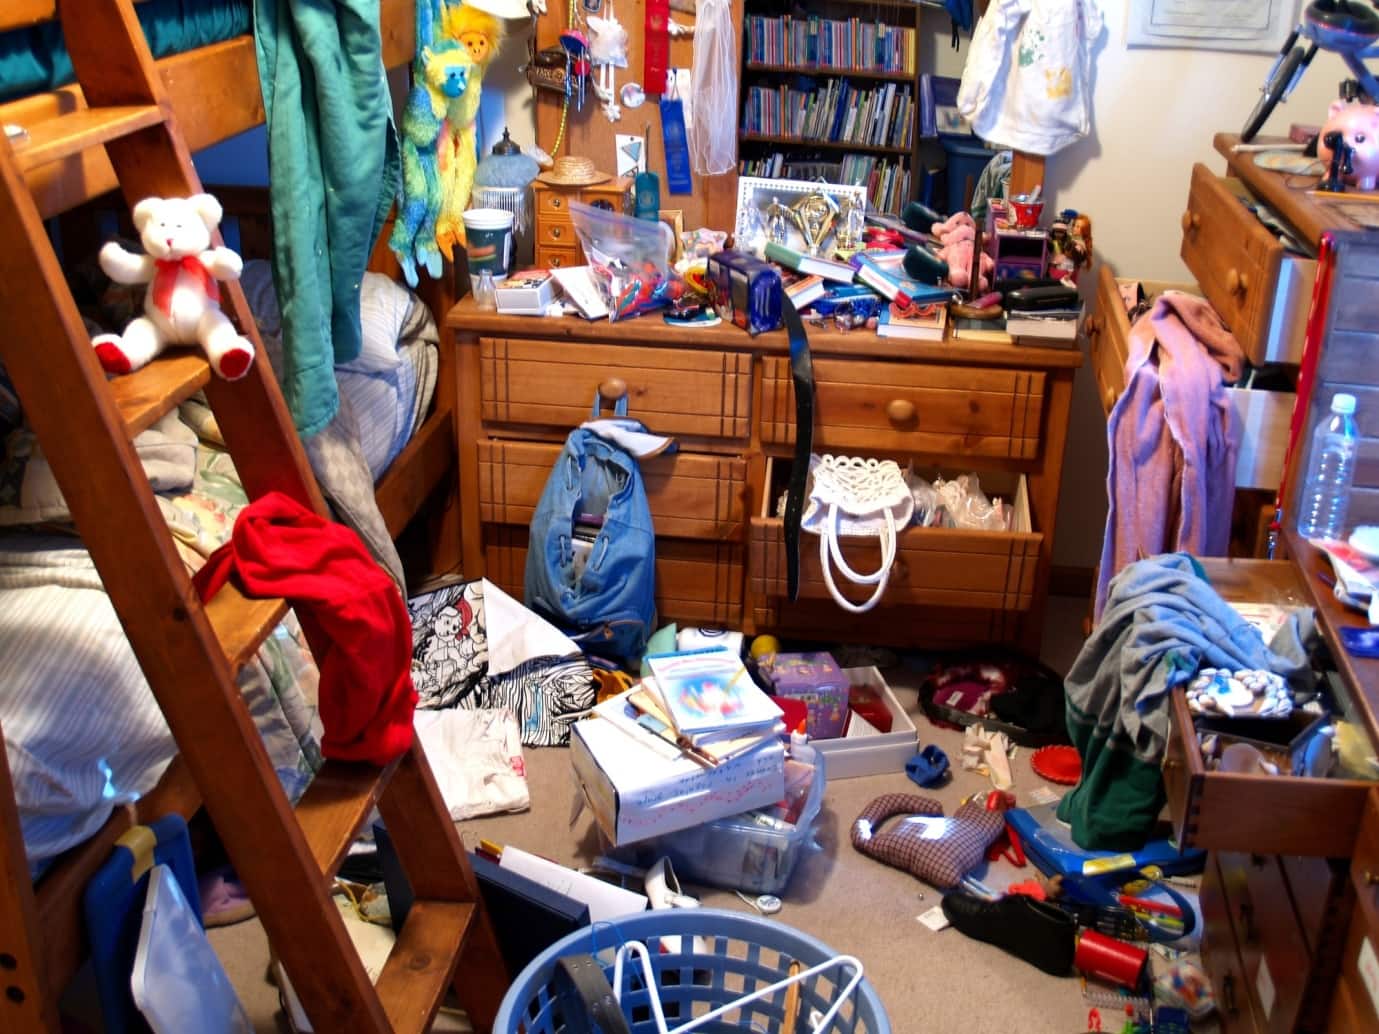 It’s Time to Let Go. Learn How to Get Rid of Clutter Fast! Stuffed and littery dorm room with bunk bed and old wooden dresser